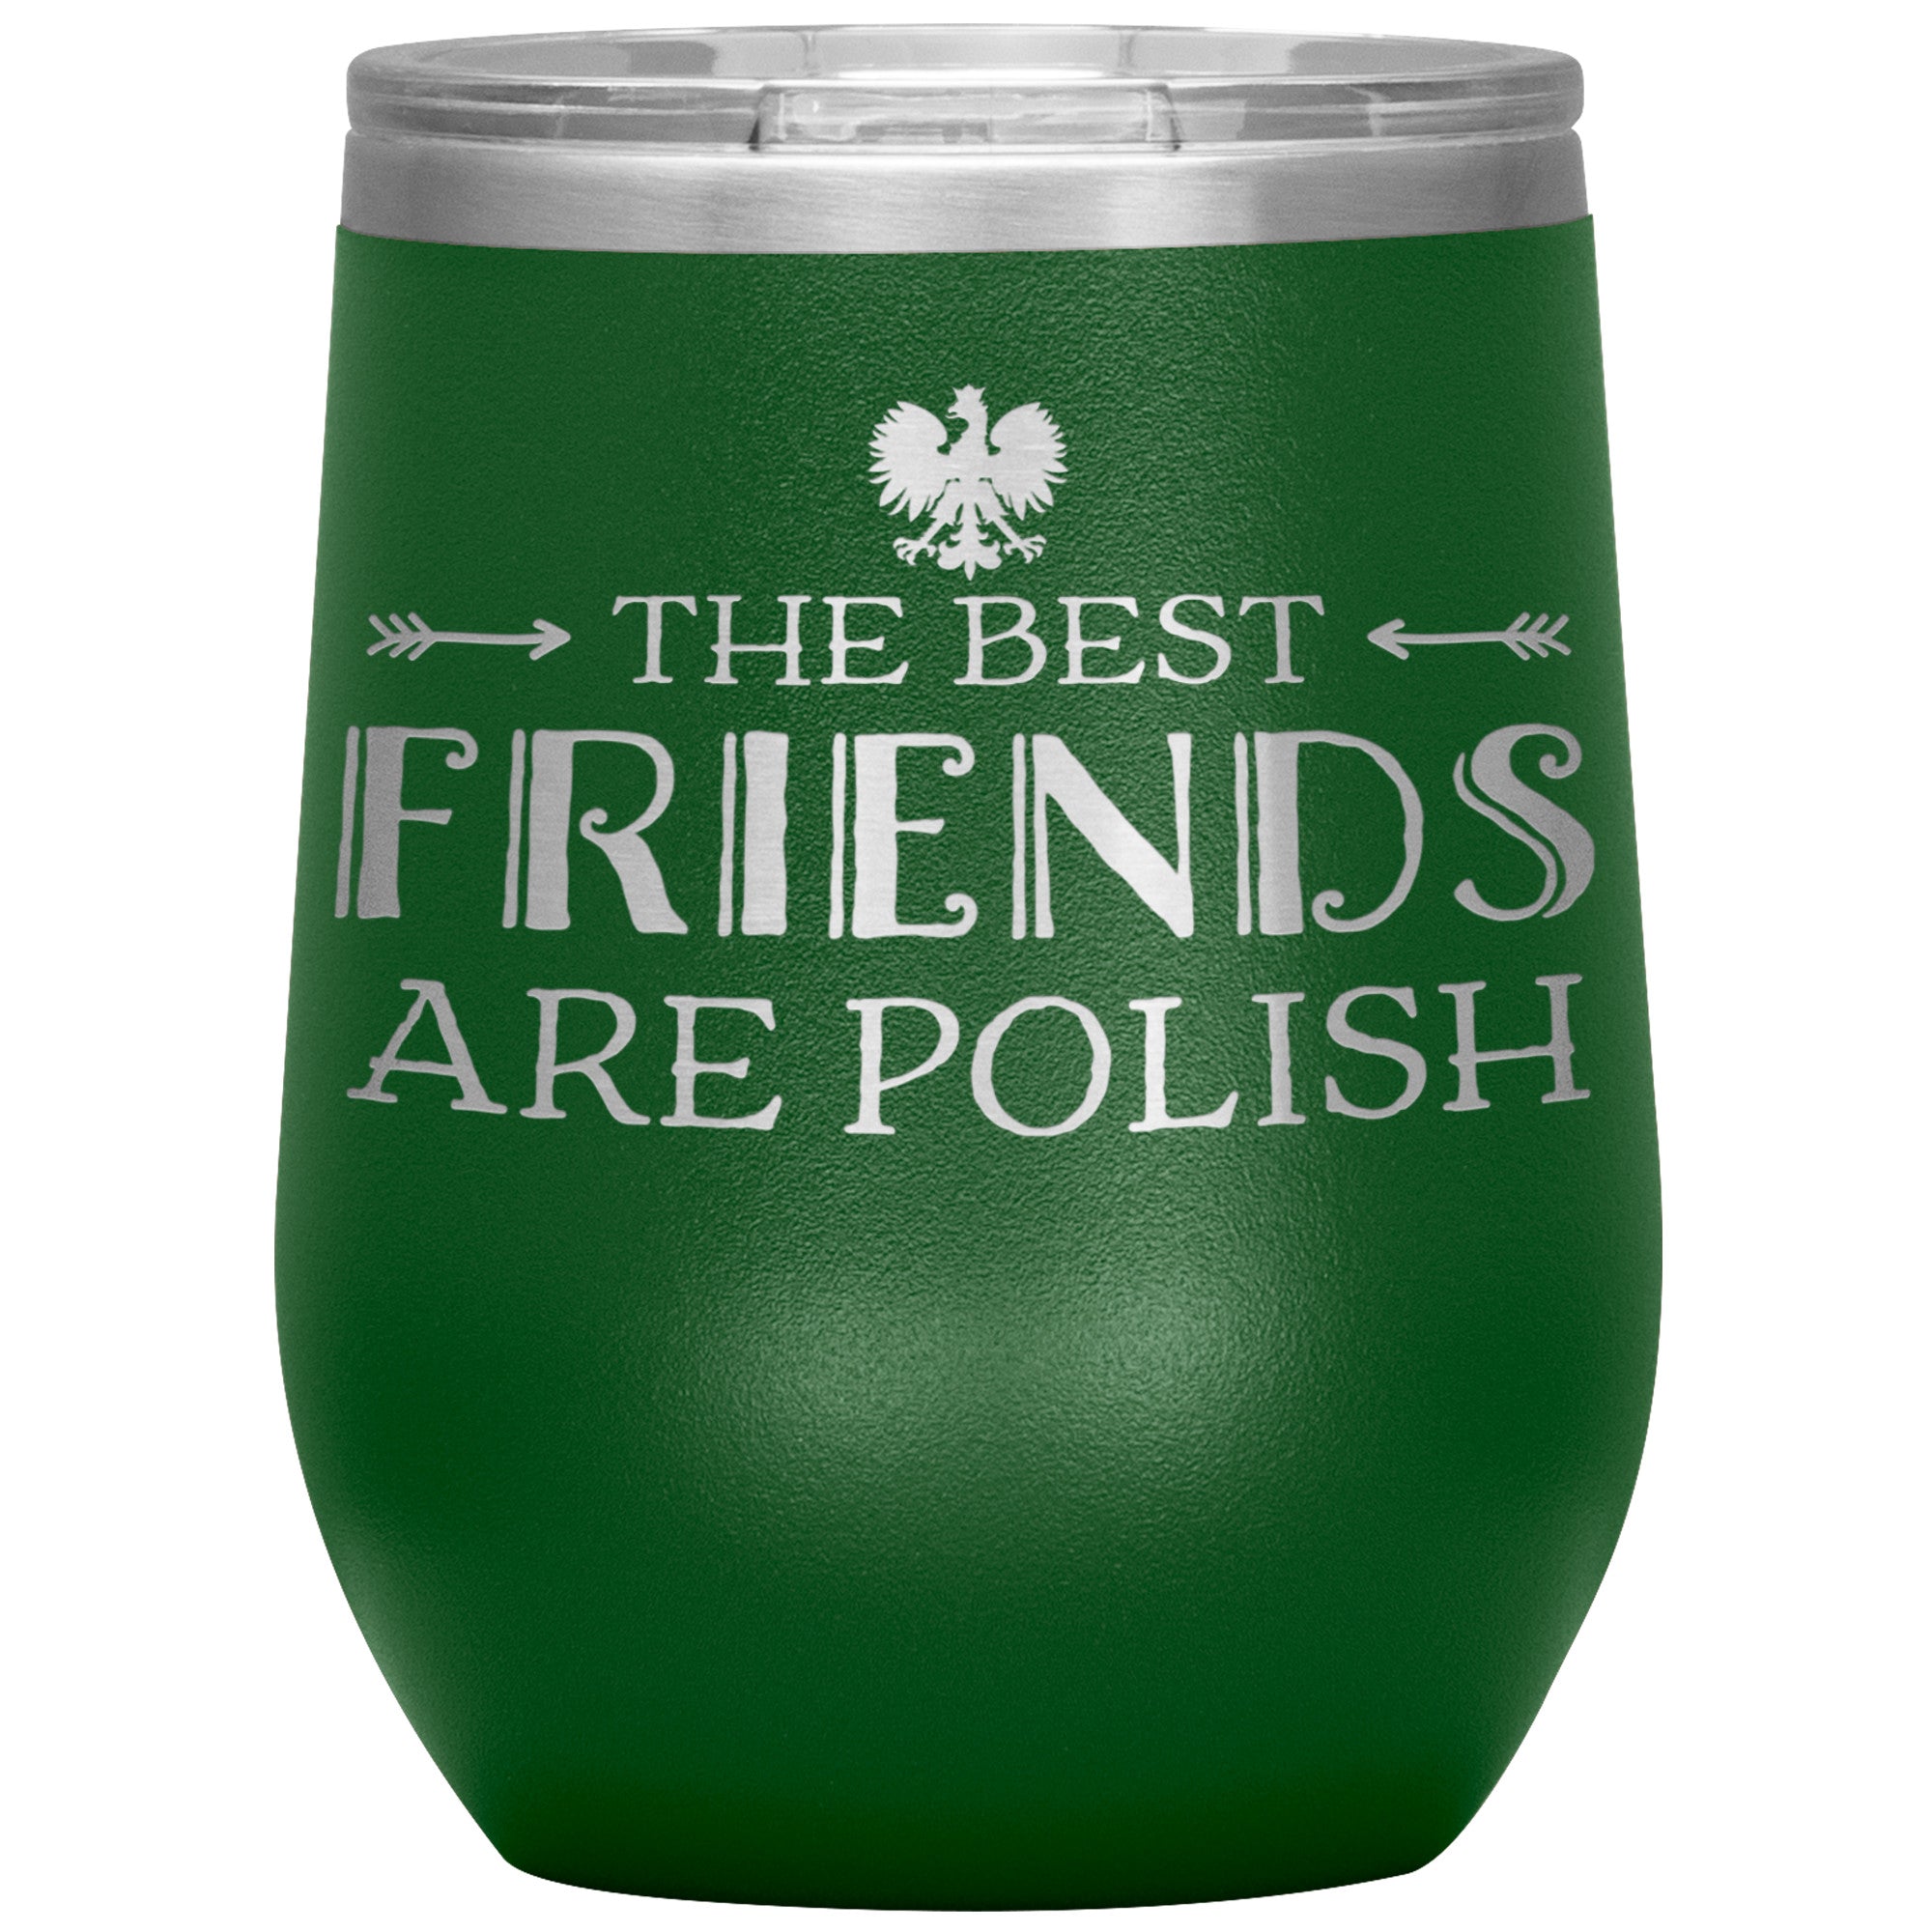 The Best Friends Are Polish Insulated Wine Tumbler Tumblers teelaunch Green  